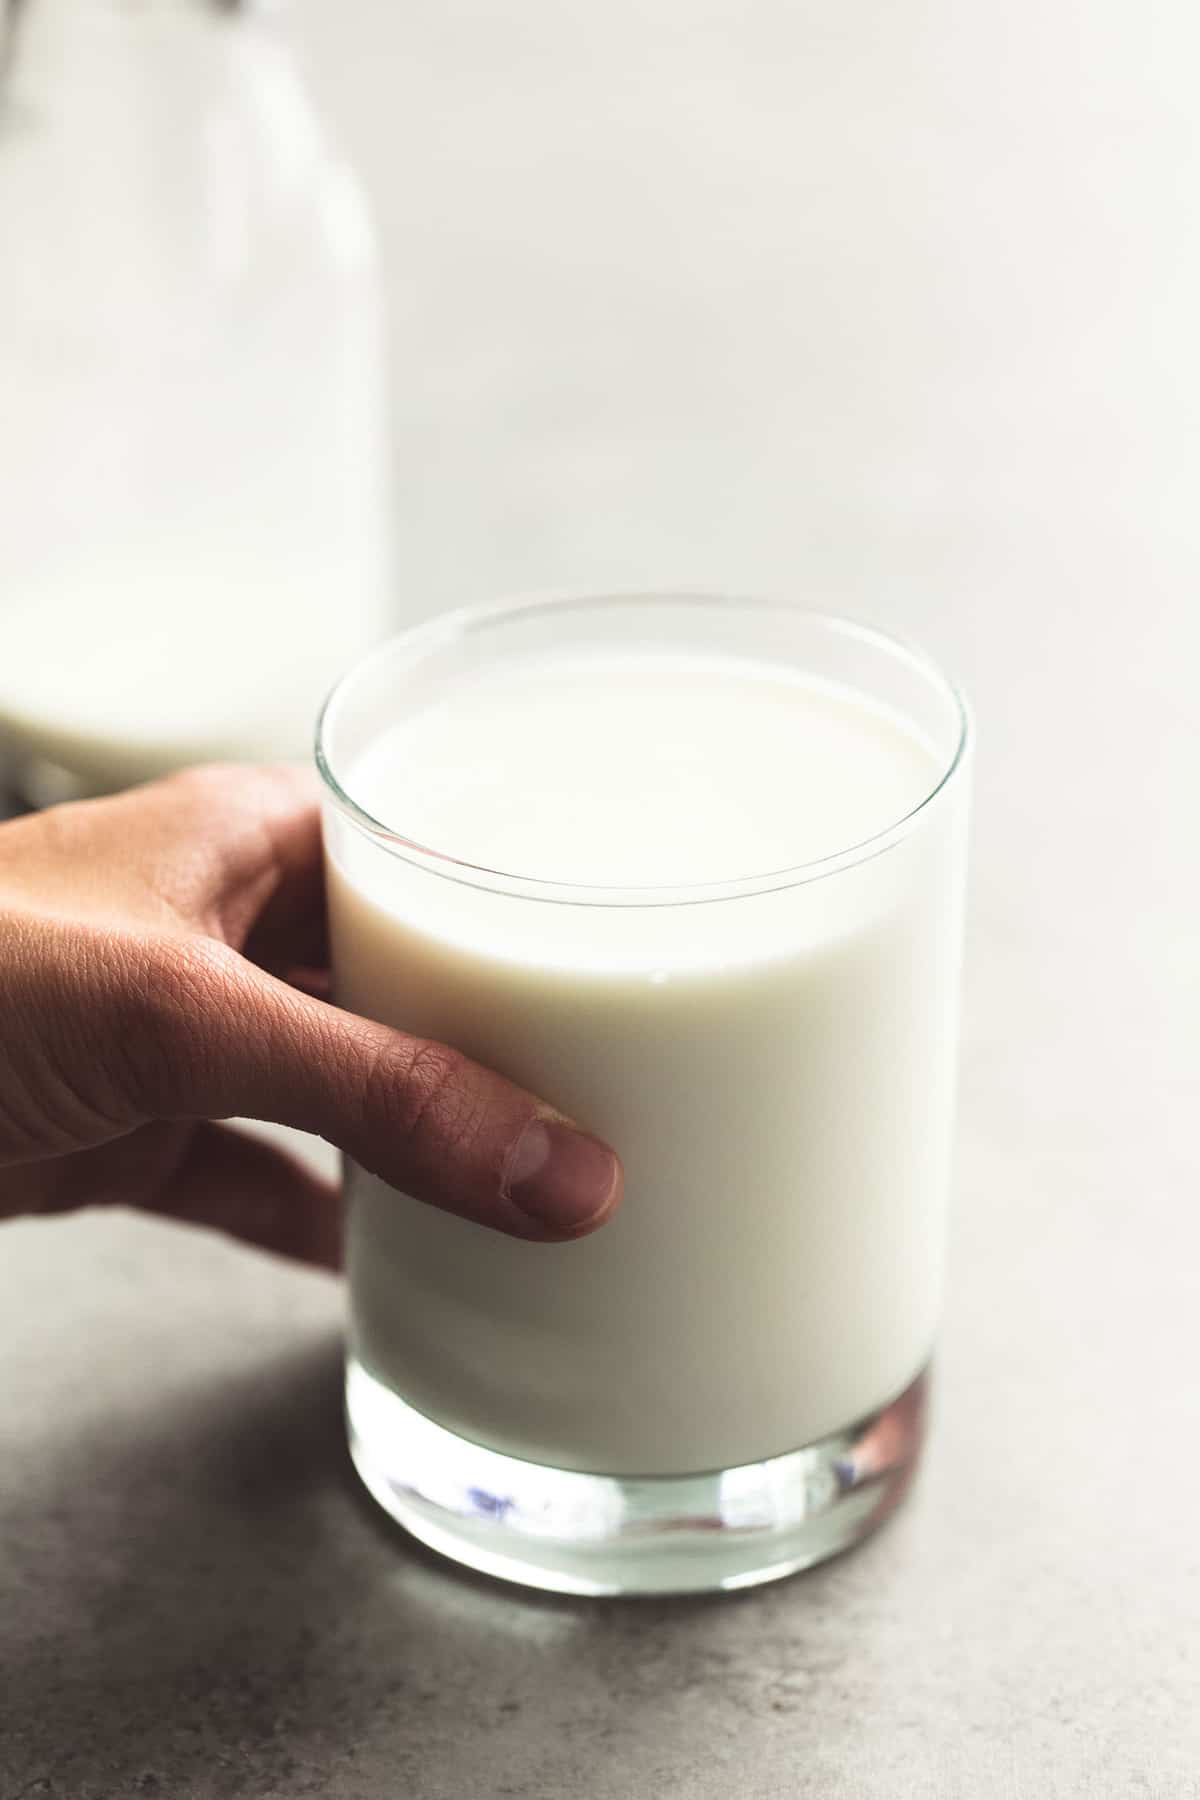 a hand holding a glass of milk.